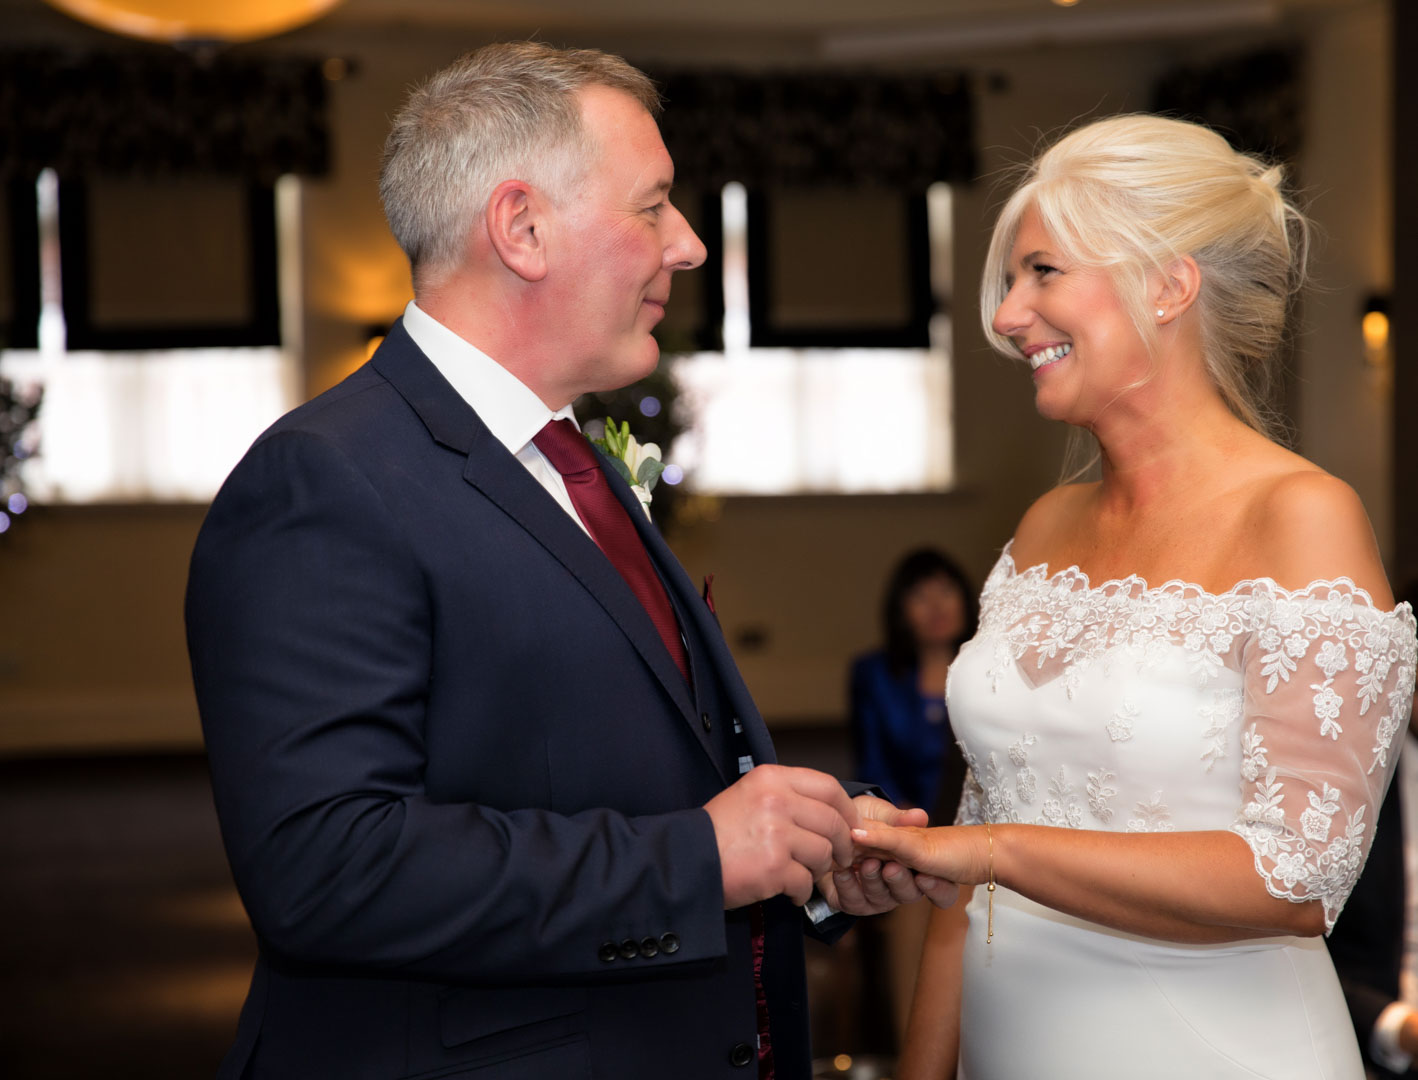 Paul and Louise's wedding photography in Lytham St Annes (43 of 70)